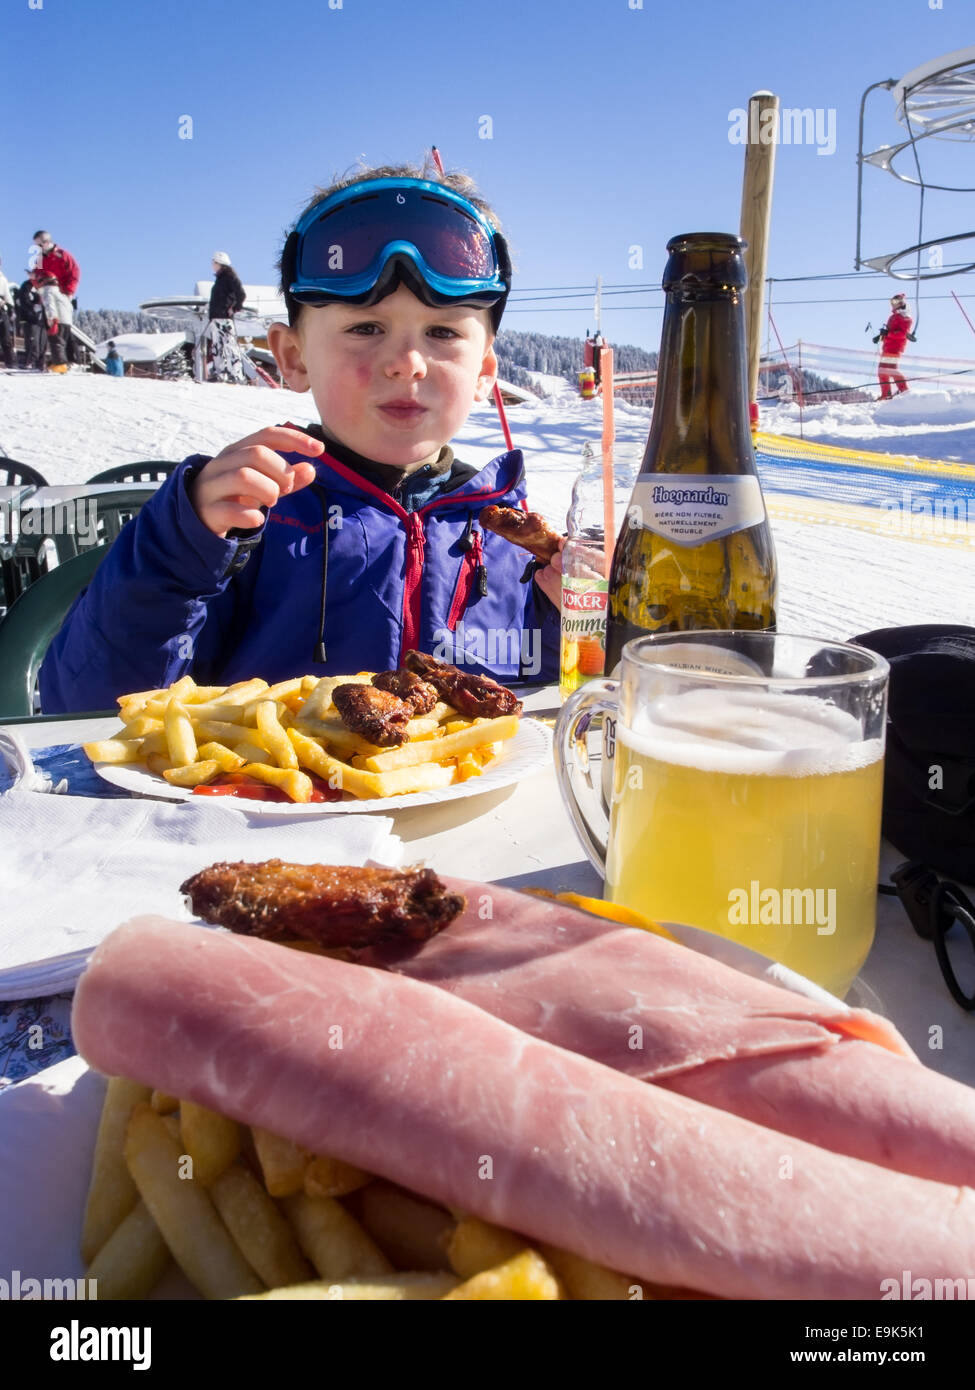 small boy in ski clothes eating at an outdoor table next to a ski piste with beer and food in foreground Stock Photo